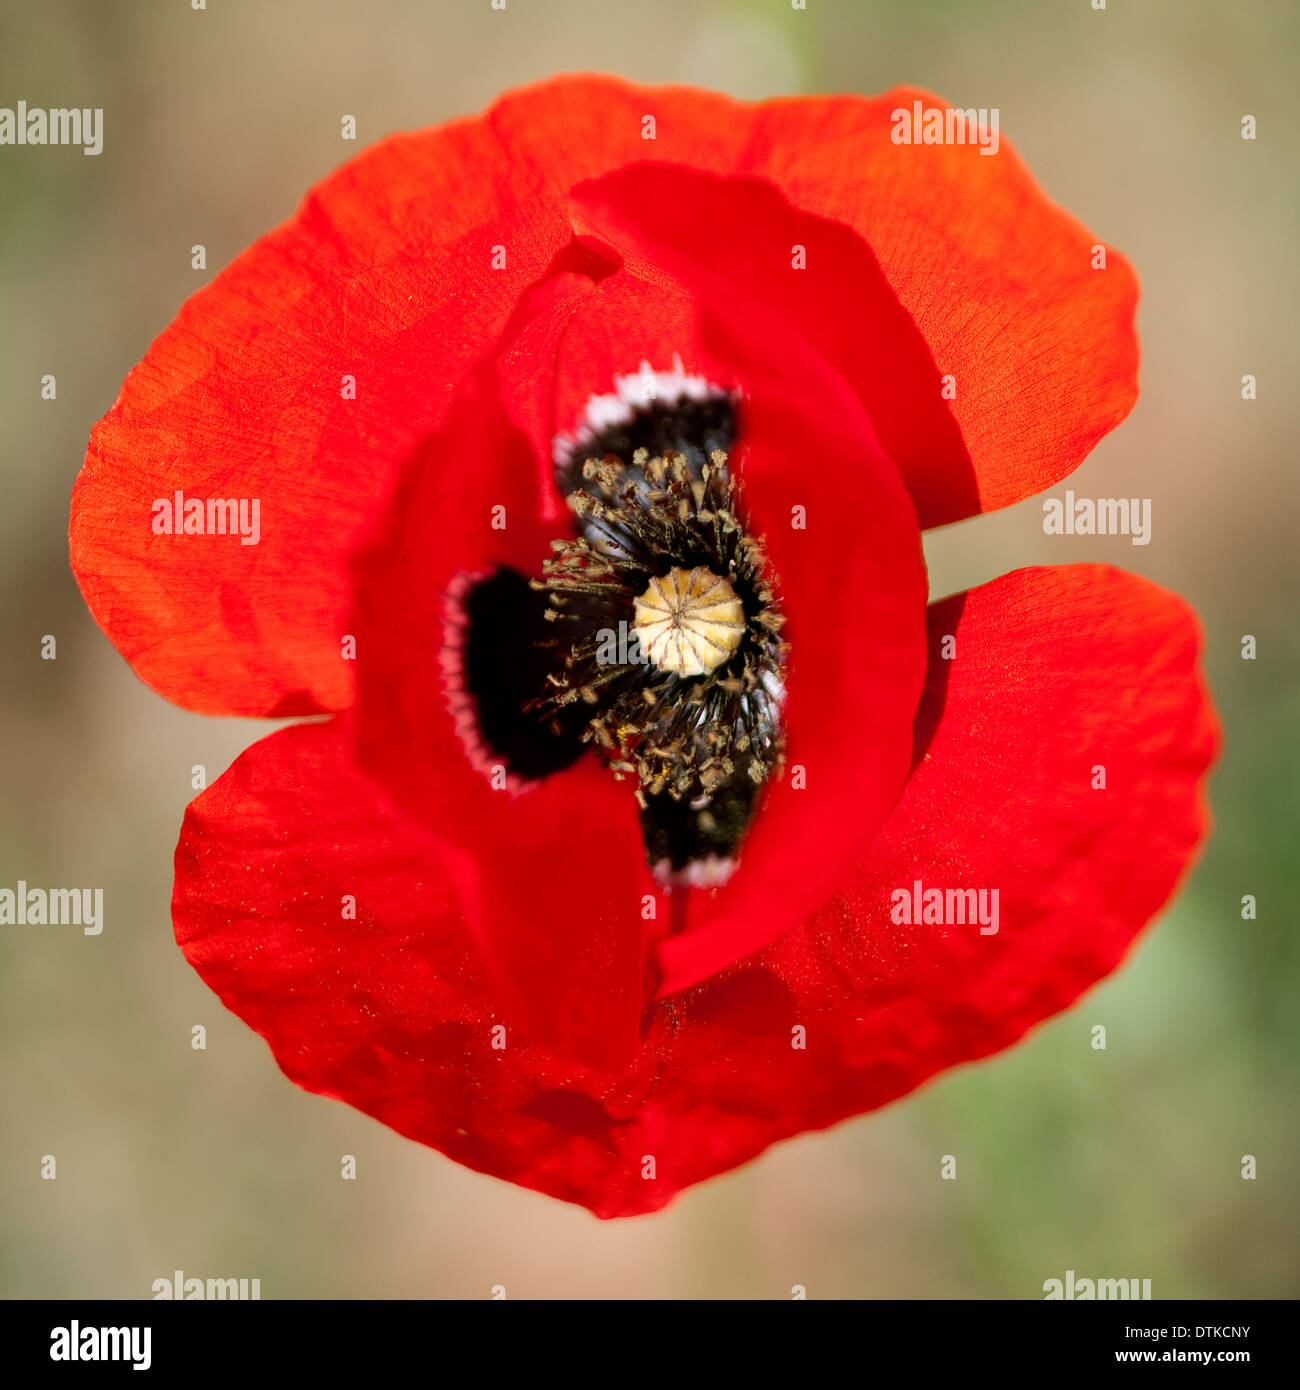 Extreme close up of red poppy flower Stock Photo